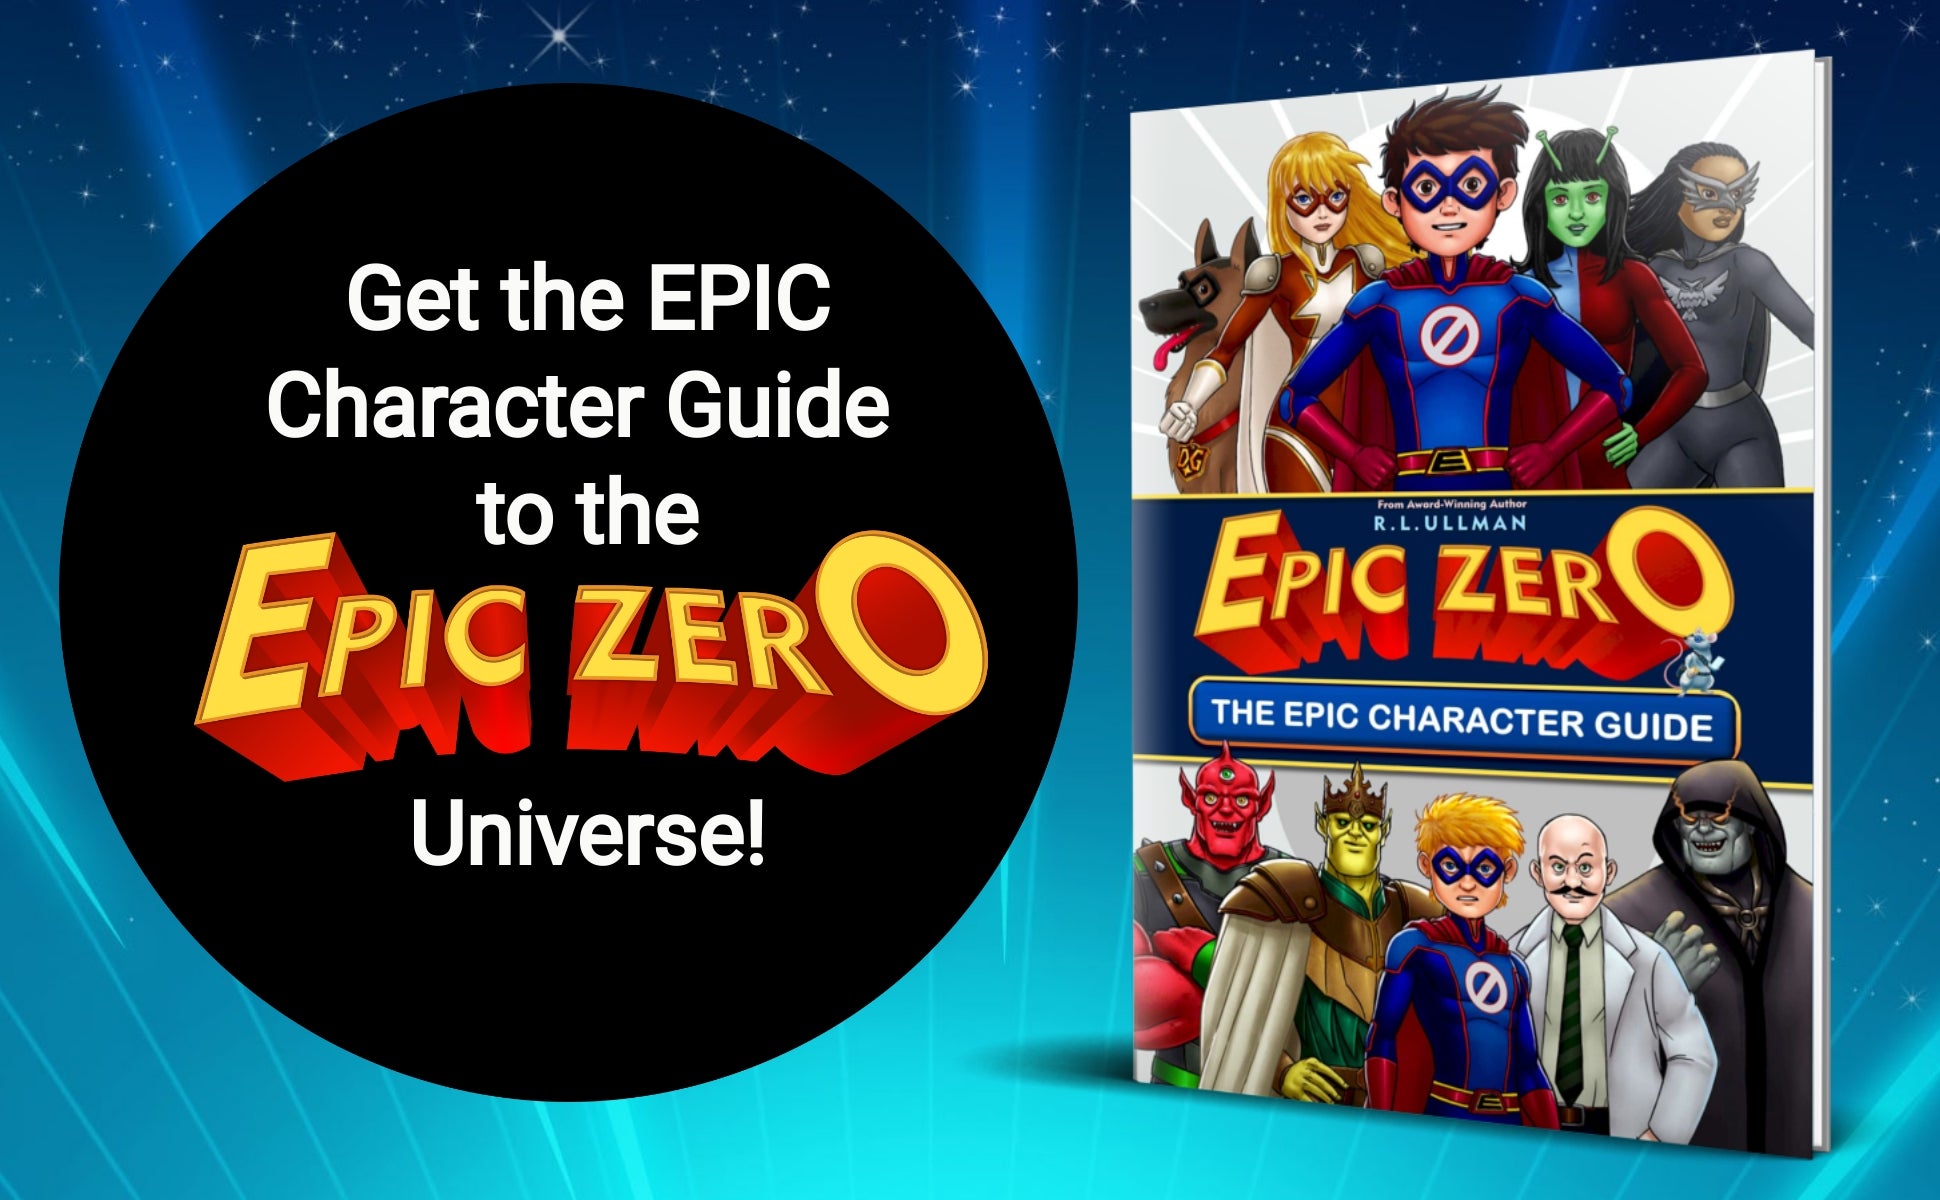 Don't Miss Epic Zero: The Epic Character Guide!